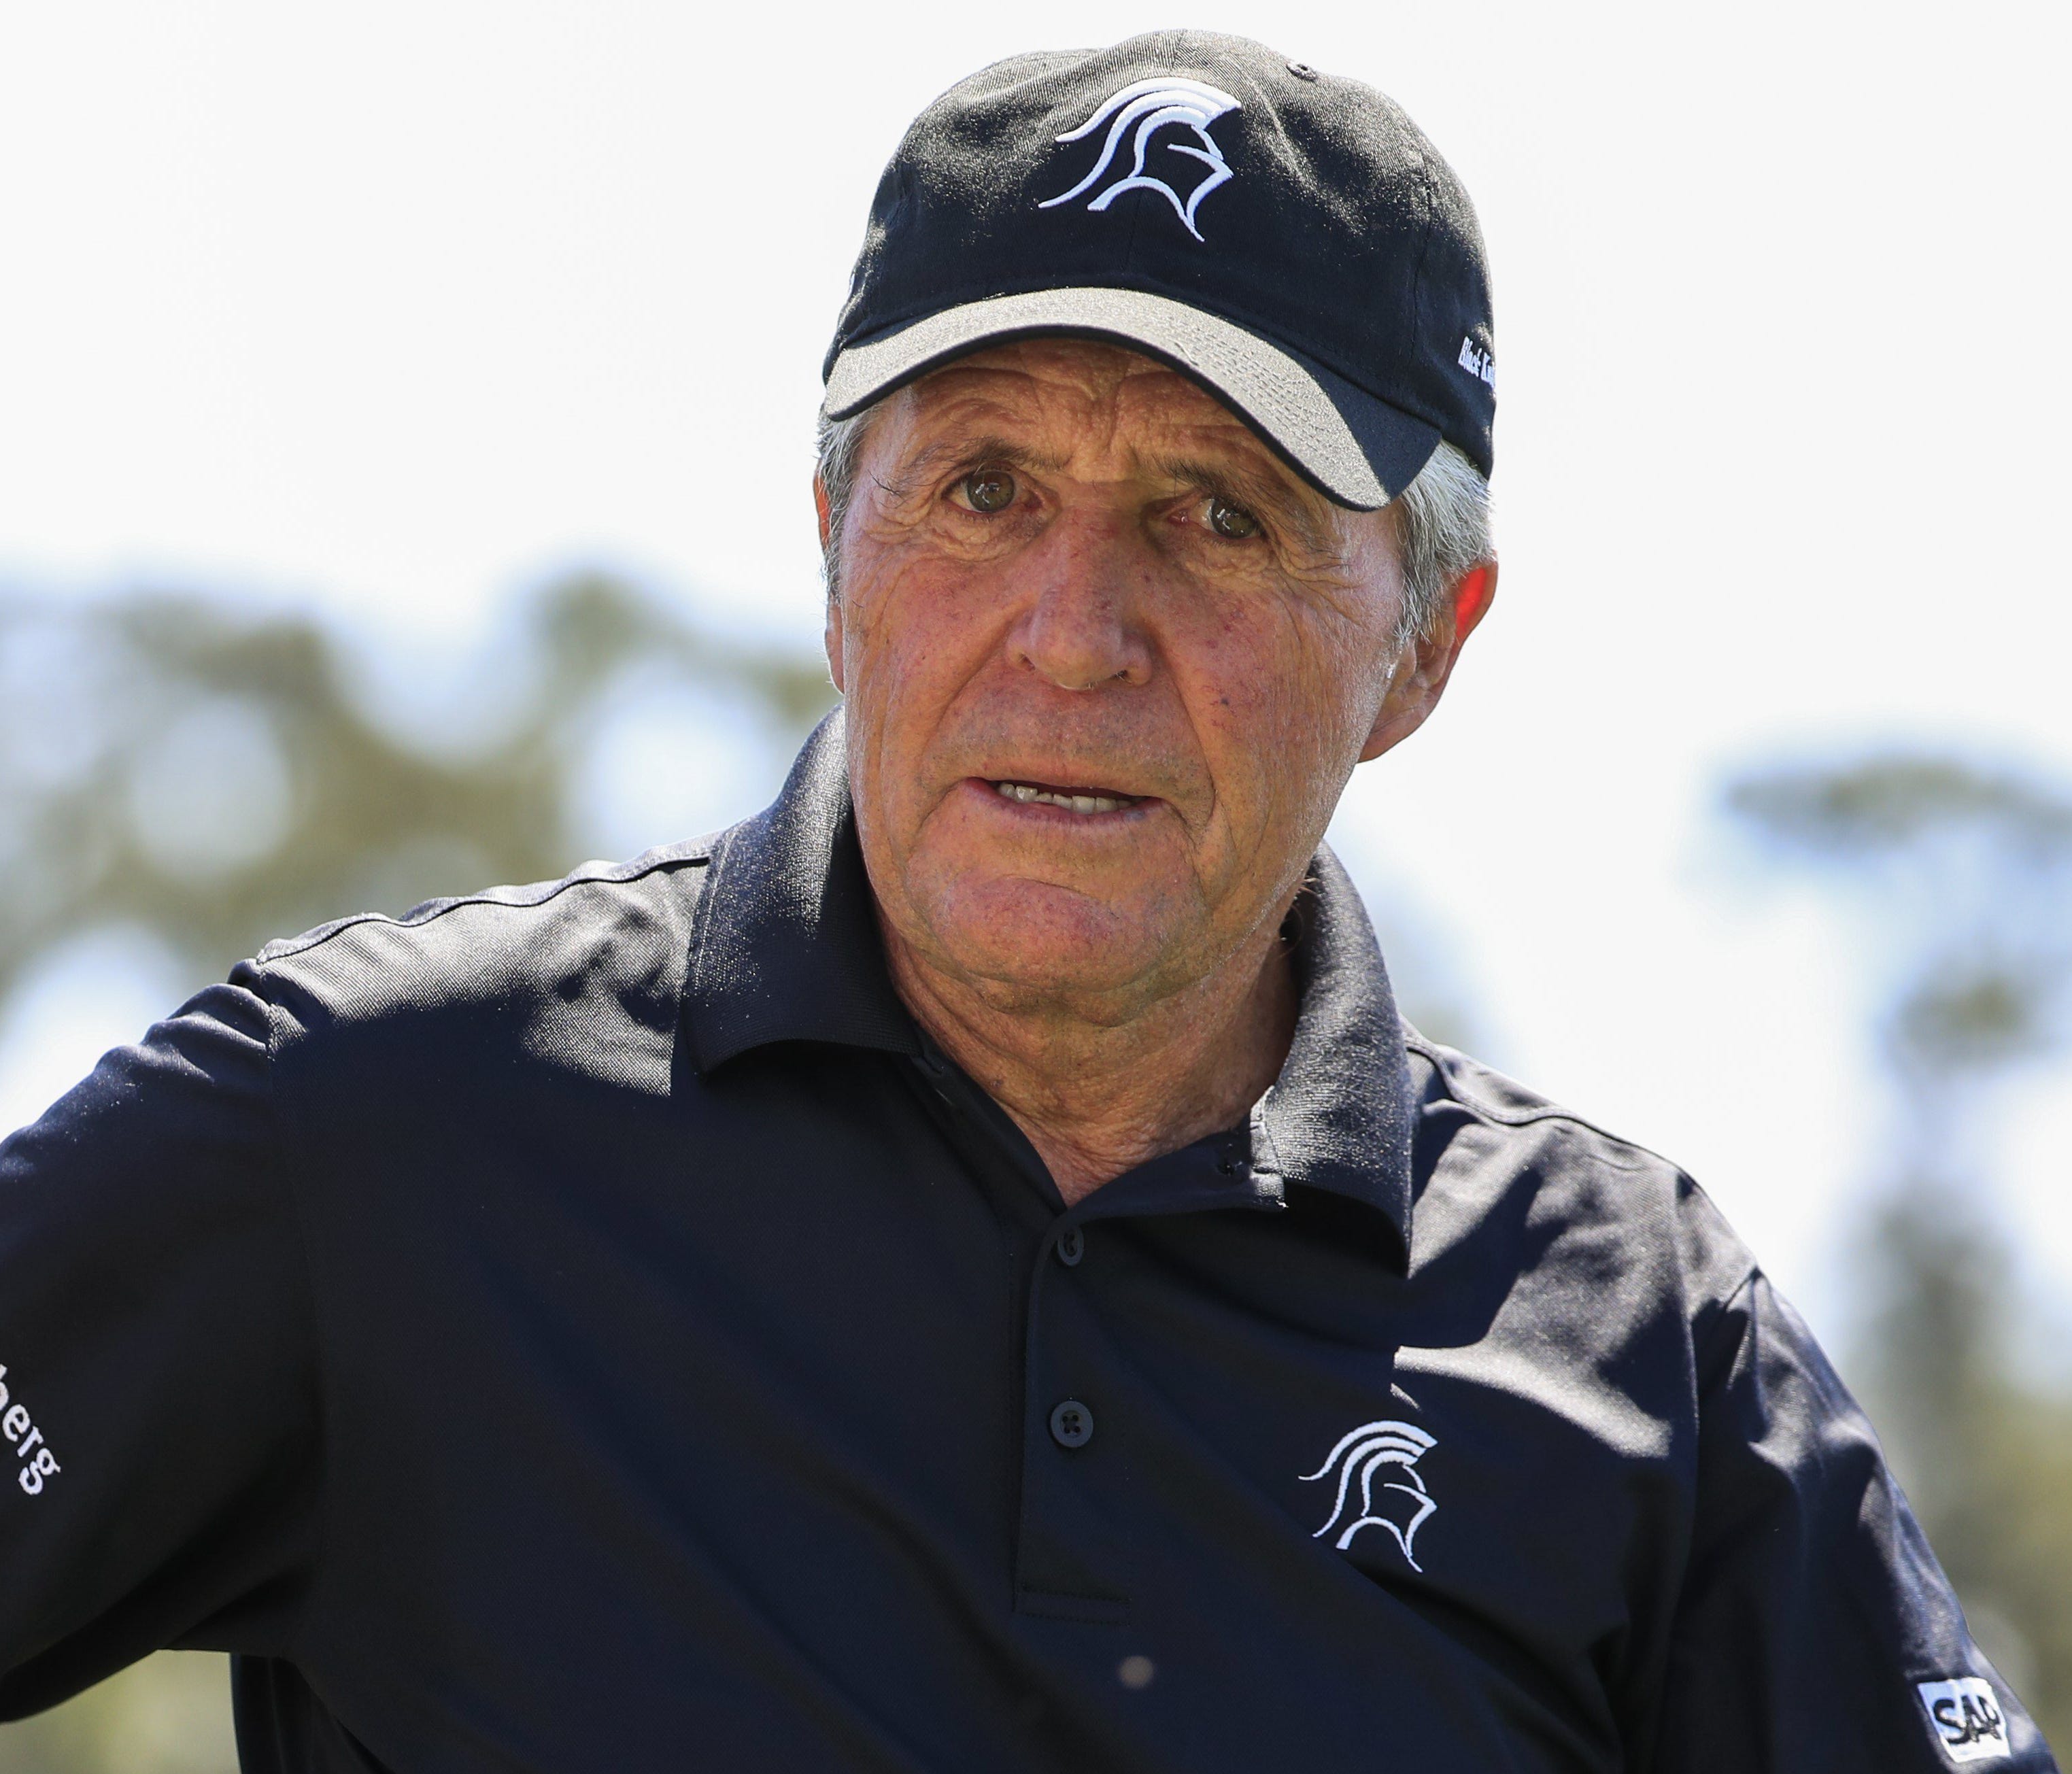 epa05885036 Gary Player of South Africa walks off the first tee during a practice round as the Drive, Chip & Putt Championship goes on elsewhere on the course at the 2017 Masters Tournament at the Augusta National Golf Club in Augusta, Georgia, U